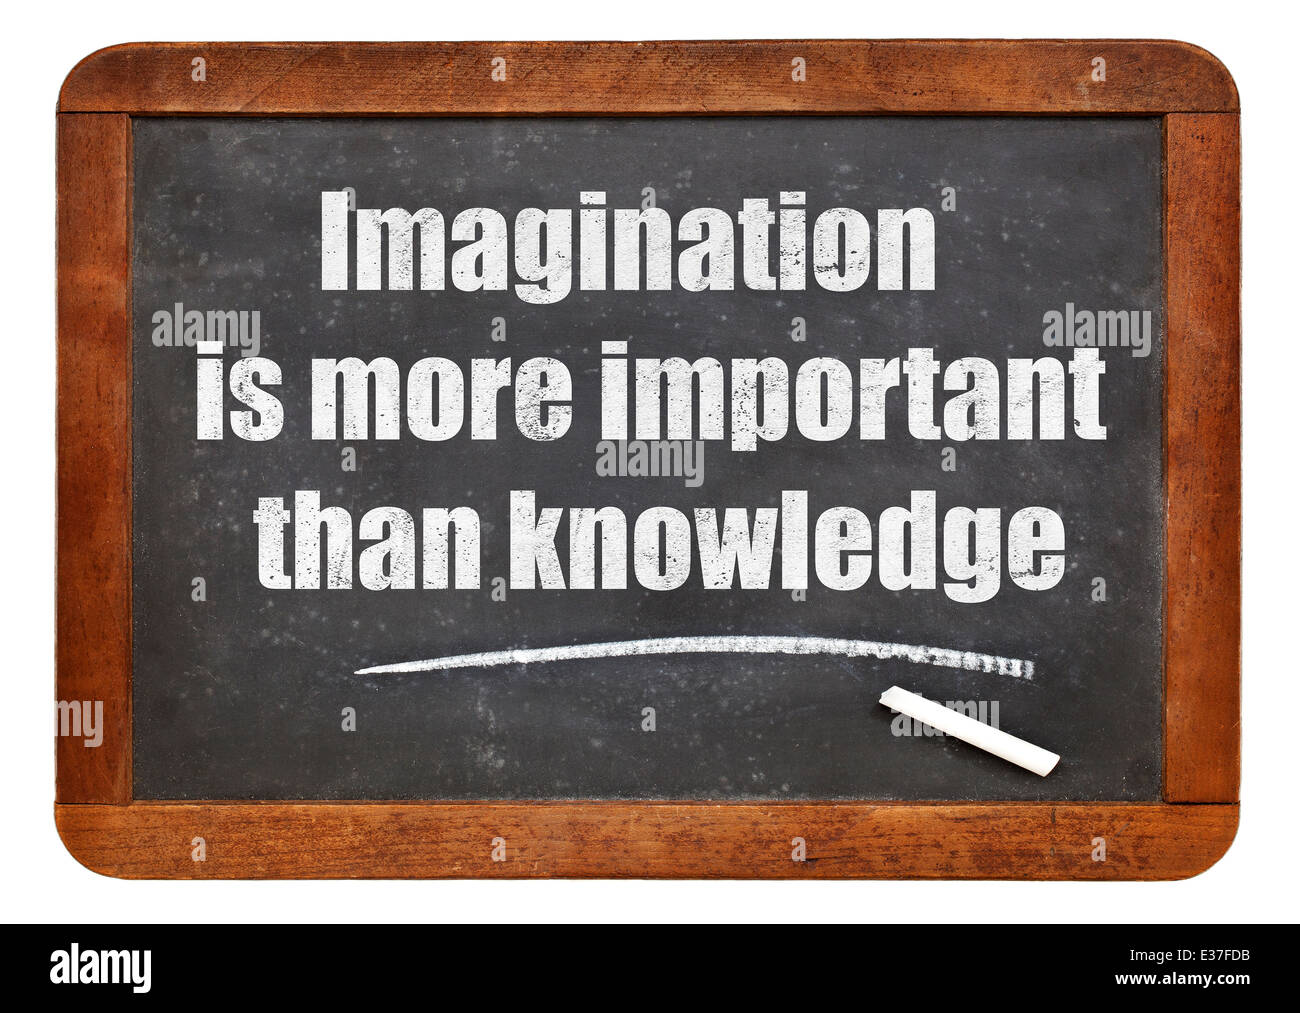 Imagination is more important than knowledge - a quote from Albert Einstein - white chalk text on a vintage slate blackboard Stock Photo